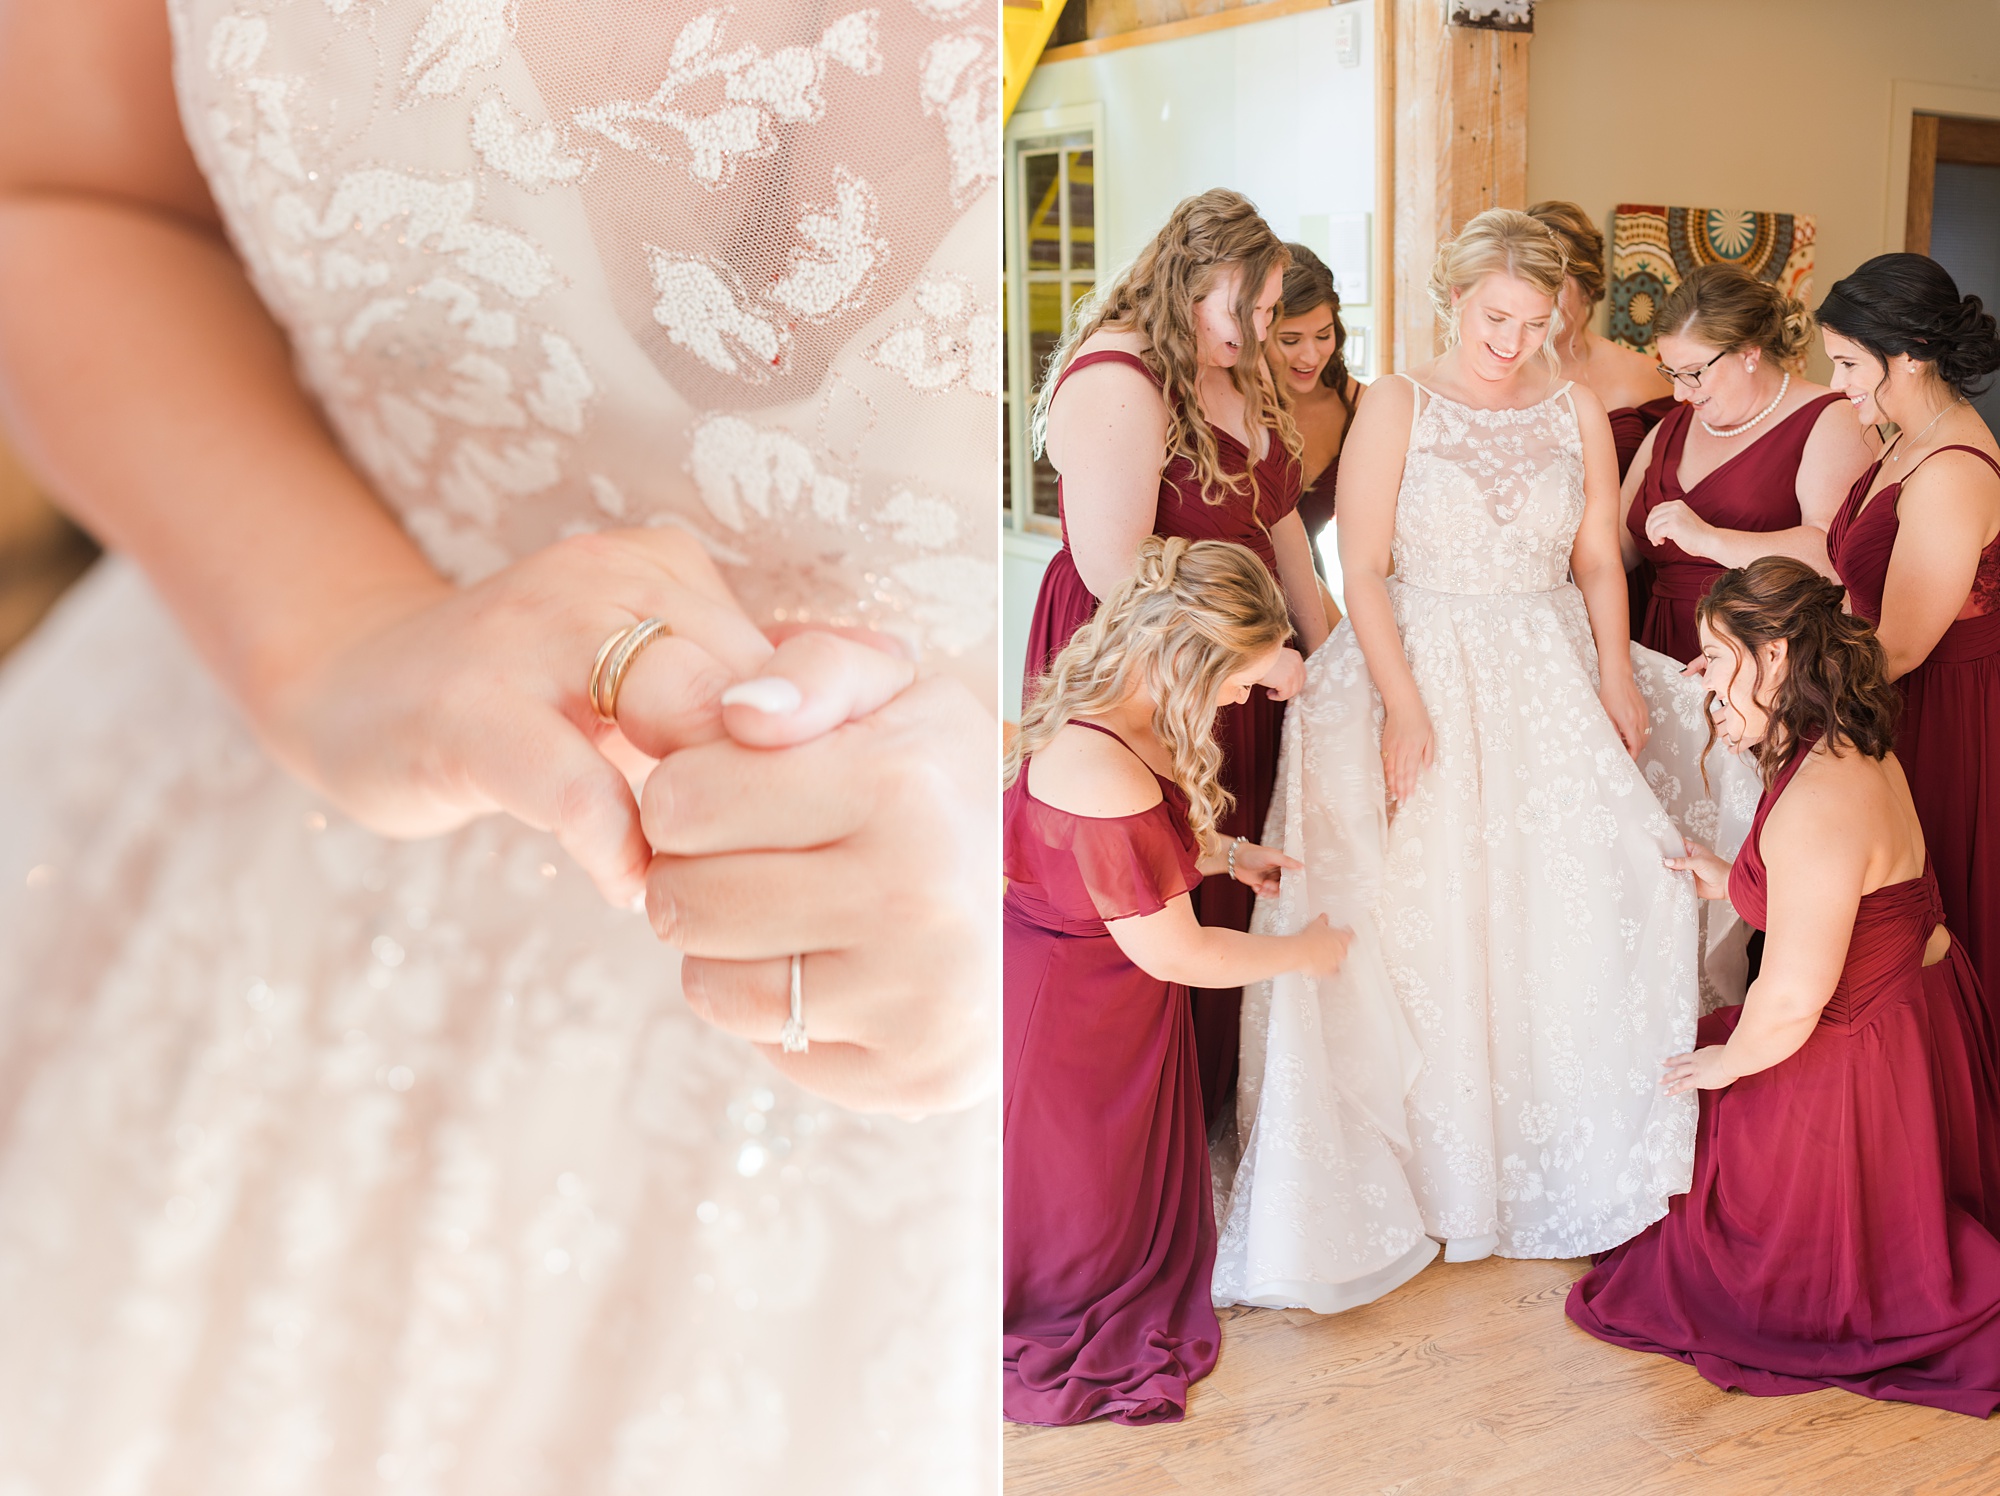 Iron Works House wedding day prep with bride and bridesmaids